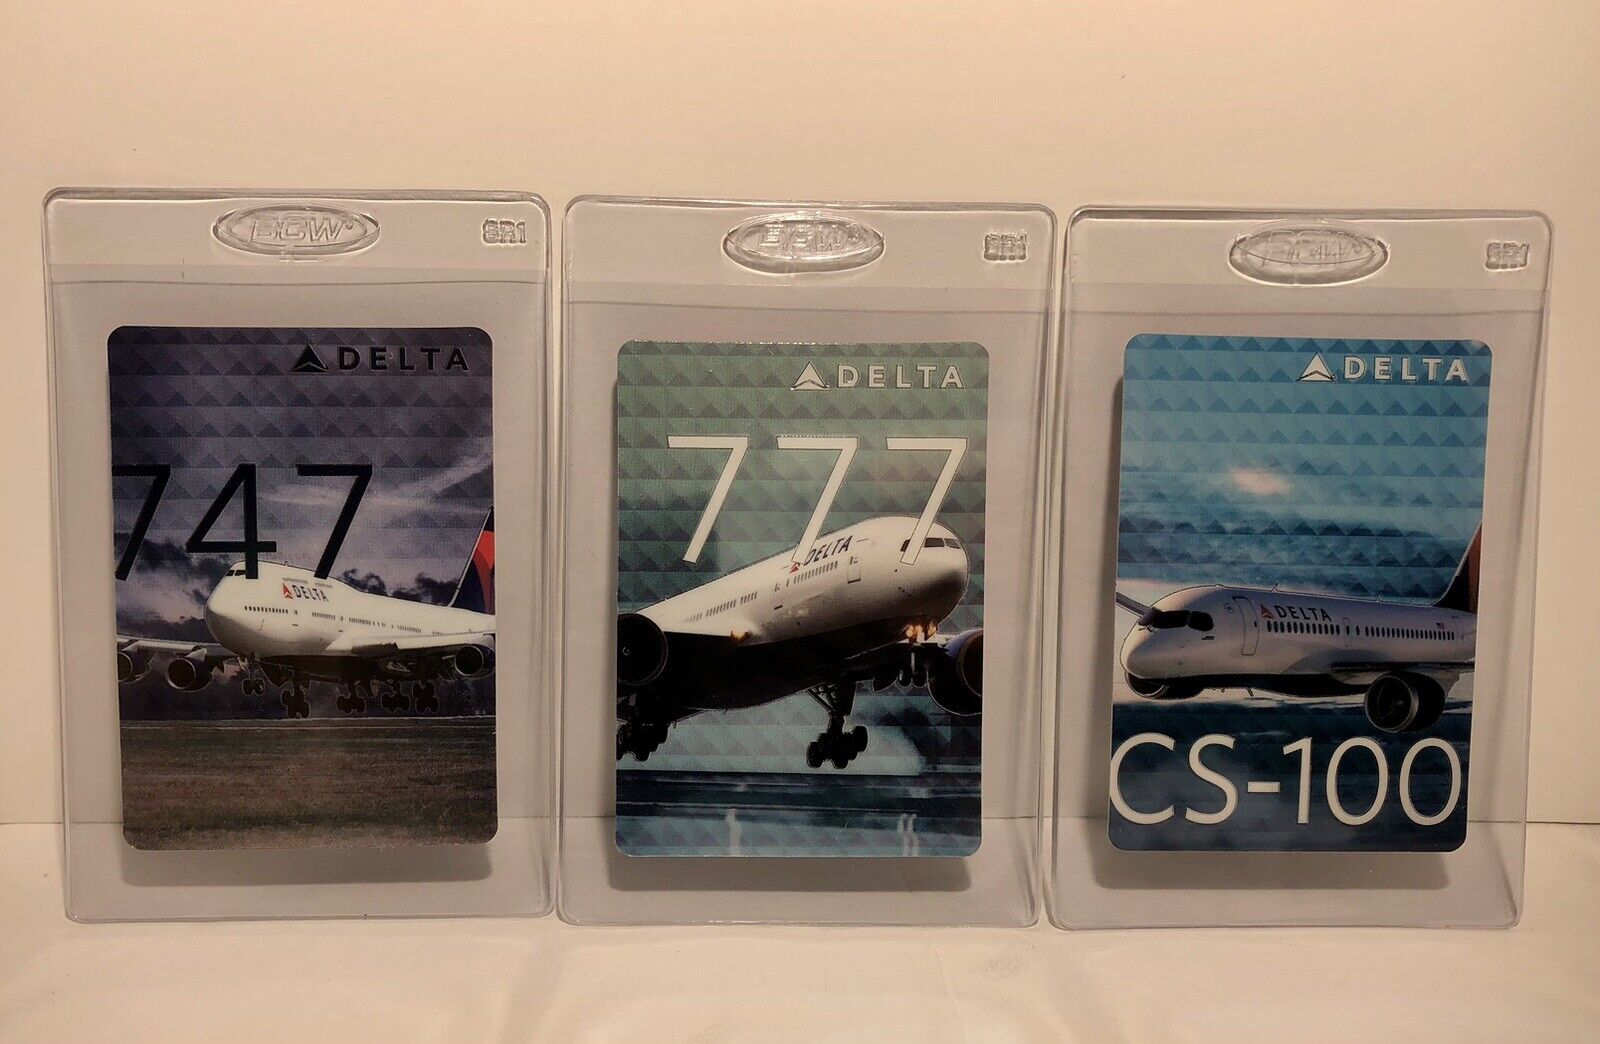 Rare Delta Airlines 747, 777 and CS-100 Plane /Pilot Trading Card Set. Brand new